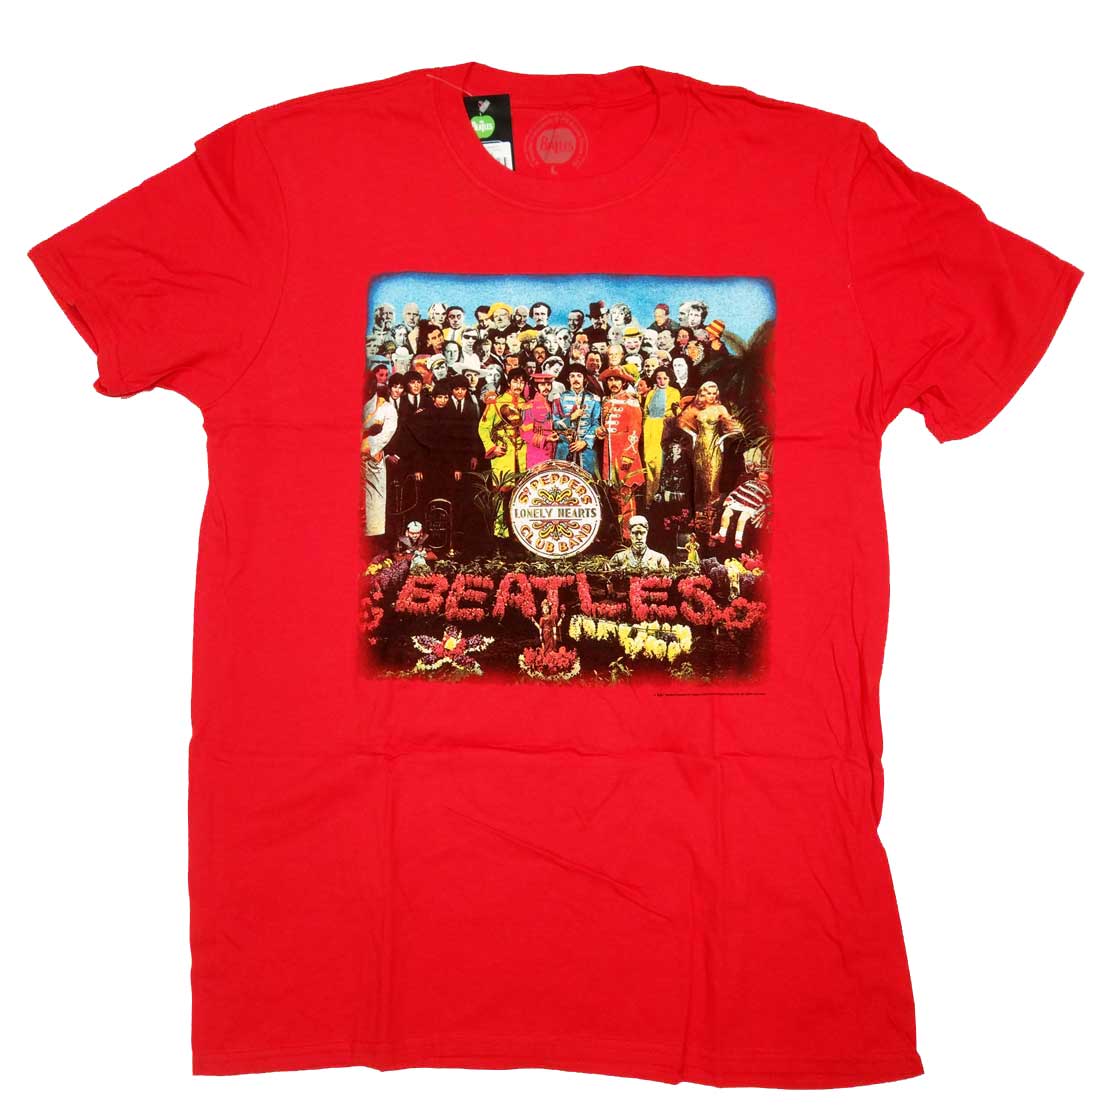 The Beatles T Shirt - Sgt. Pepper Cover Red Shirt 100% Official